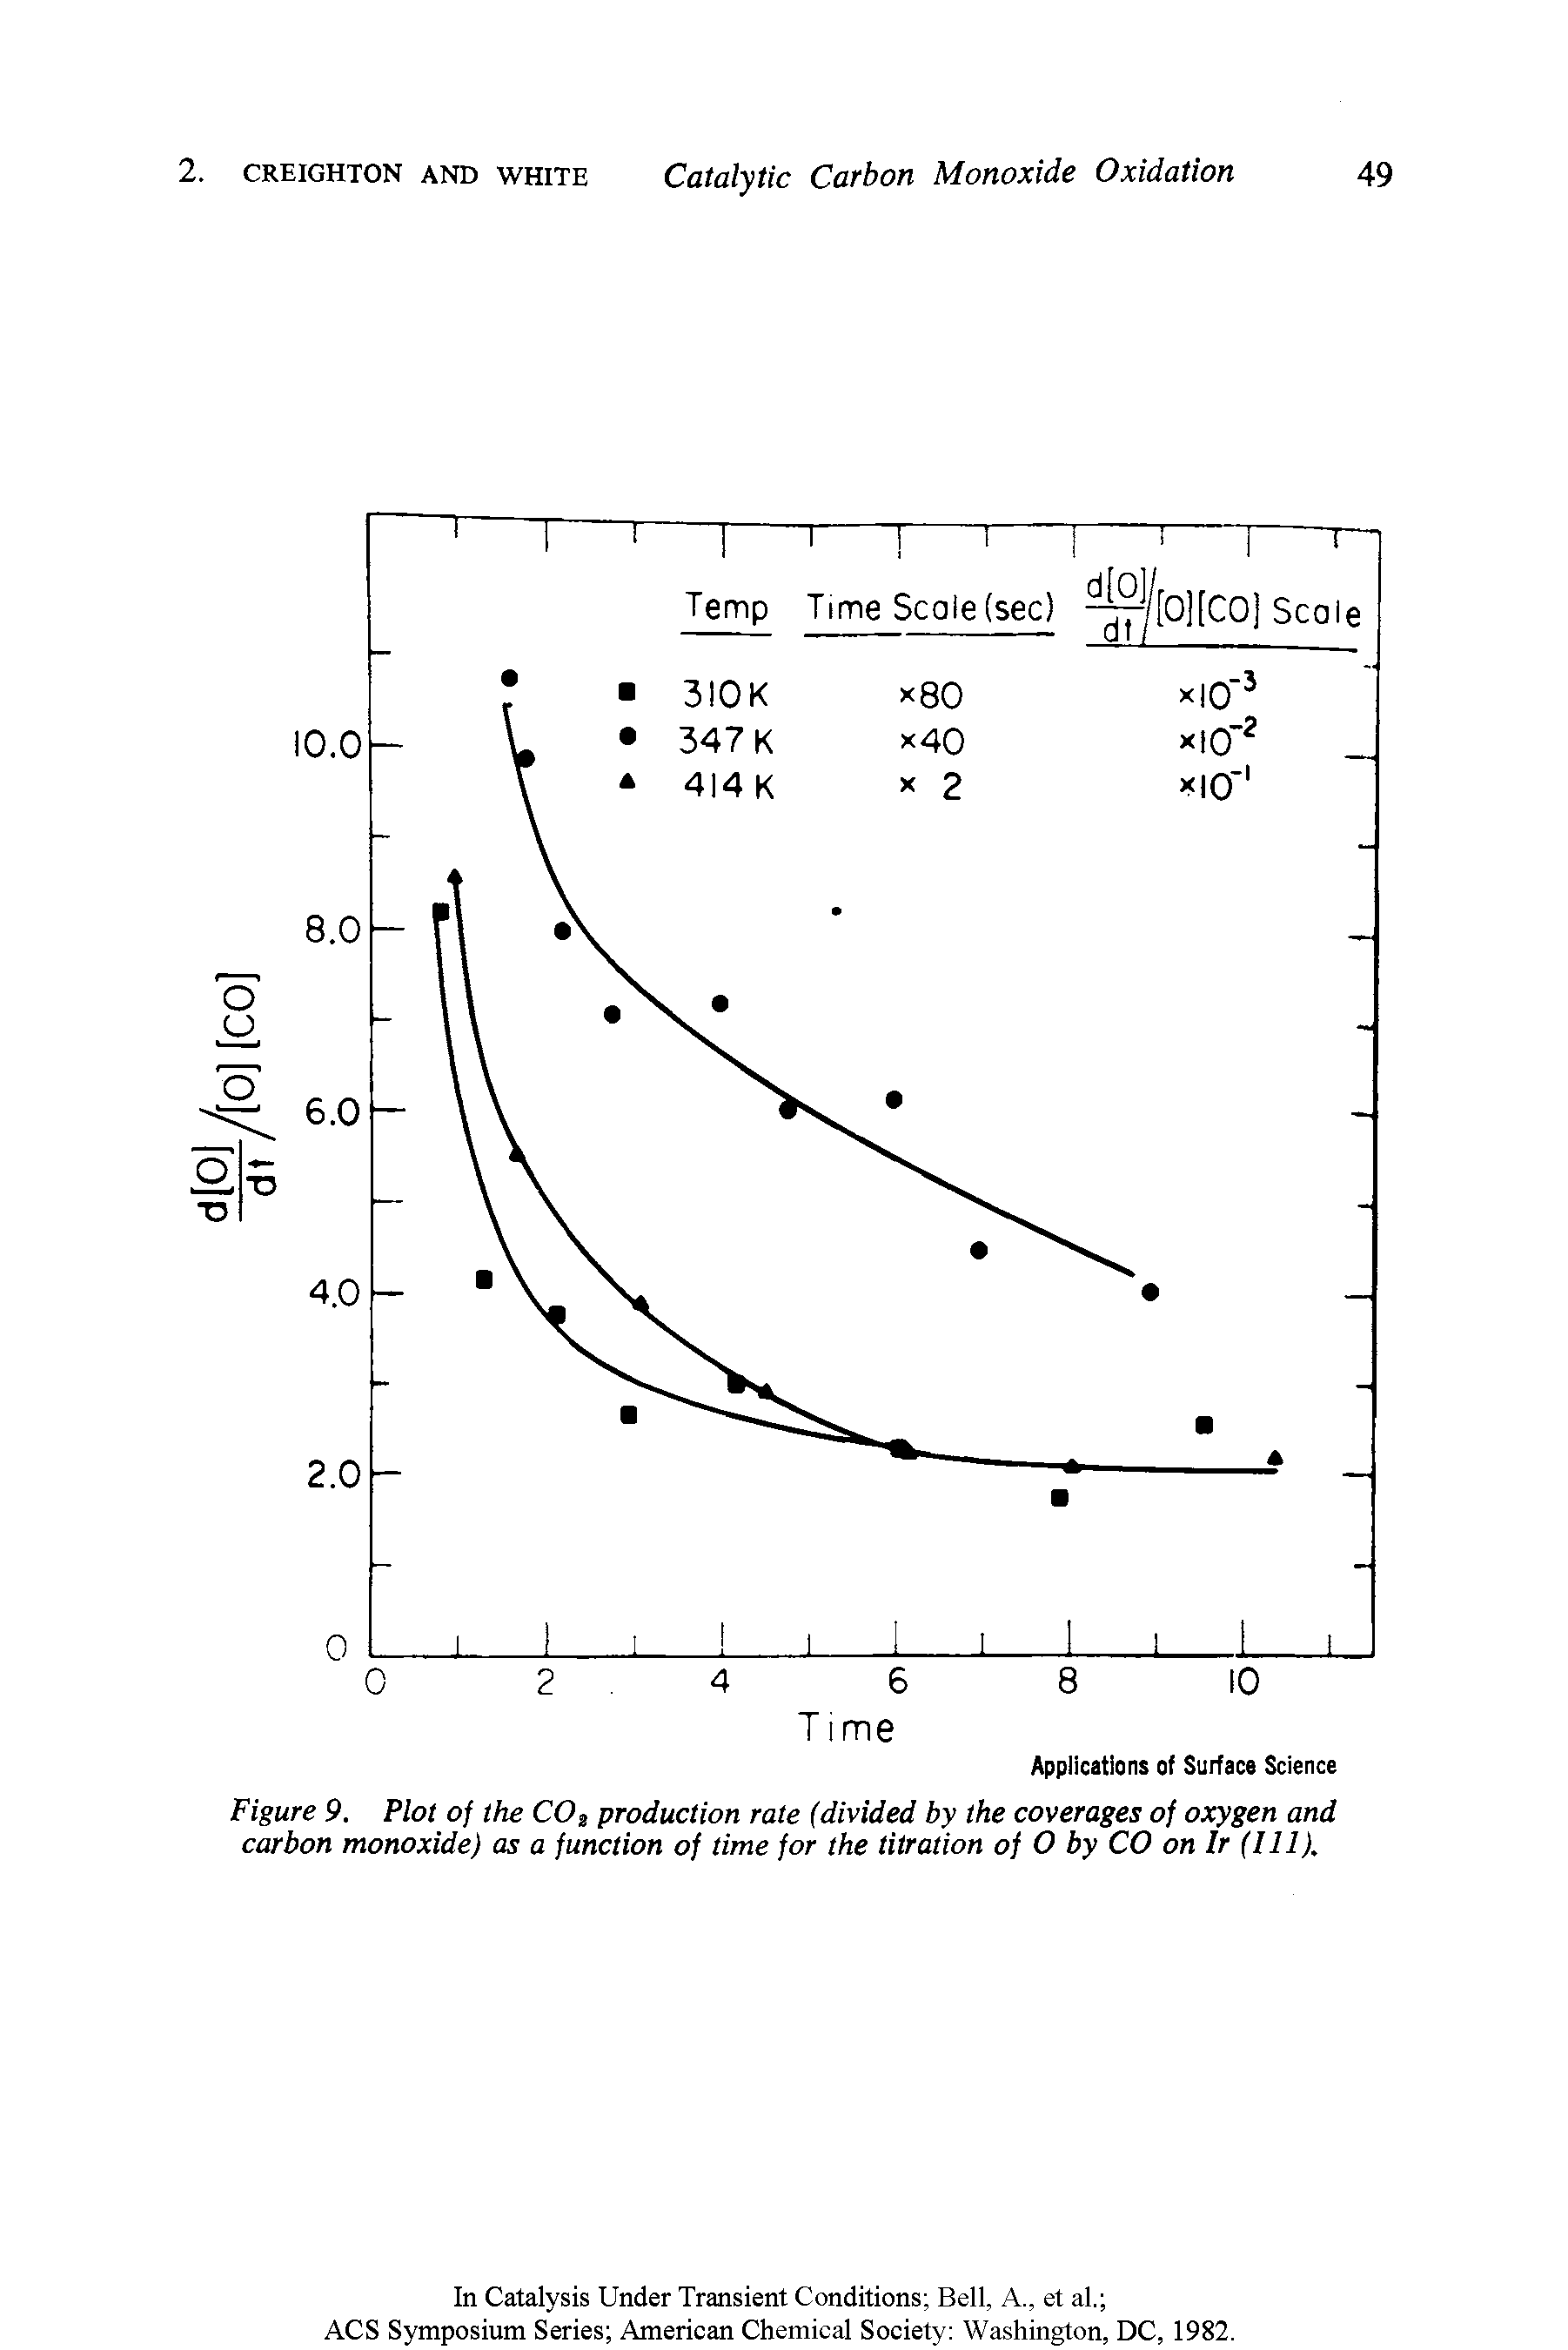 Figure 9. Plot of the CO% production rate (divided by the coverages of oxygen and carbon monoxide) as a function of time for the titration of O by CO on Ir (111).